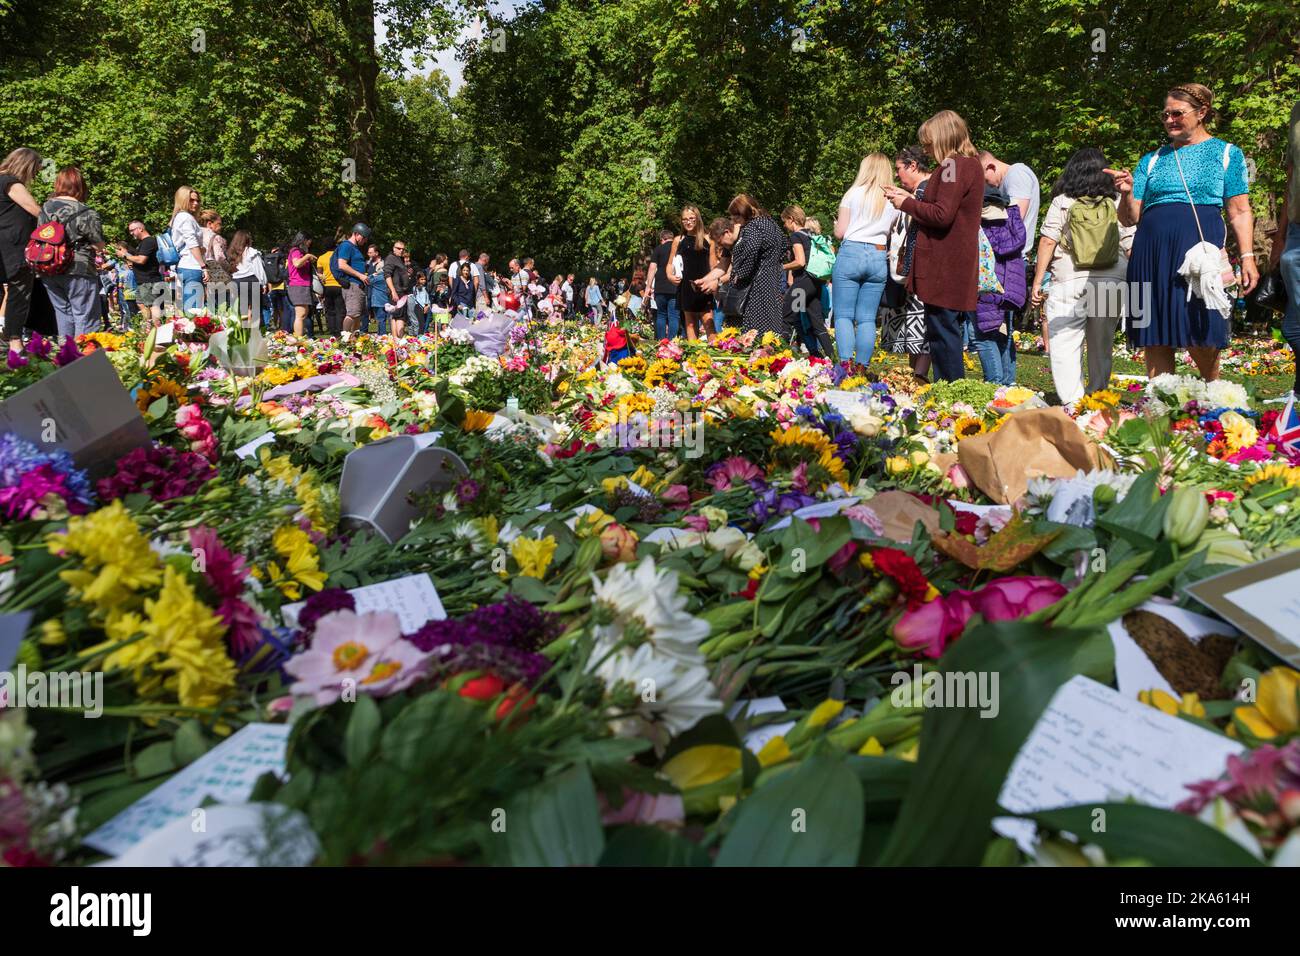 People viewing the floral tributes in Green Park, left by mourners to mark the Queen Elizabeth II death. Green Park, London, UK.  11 Sep 2022 Stock Photo